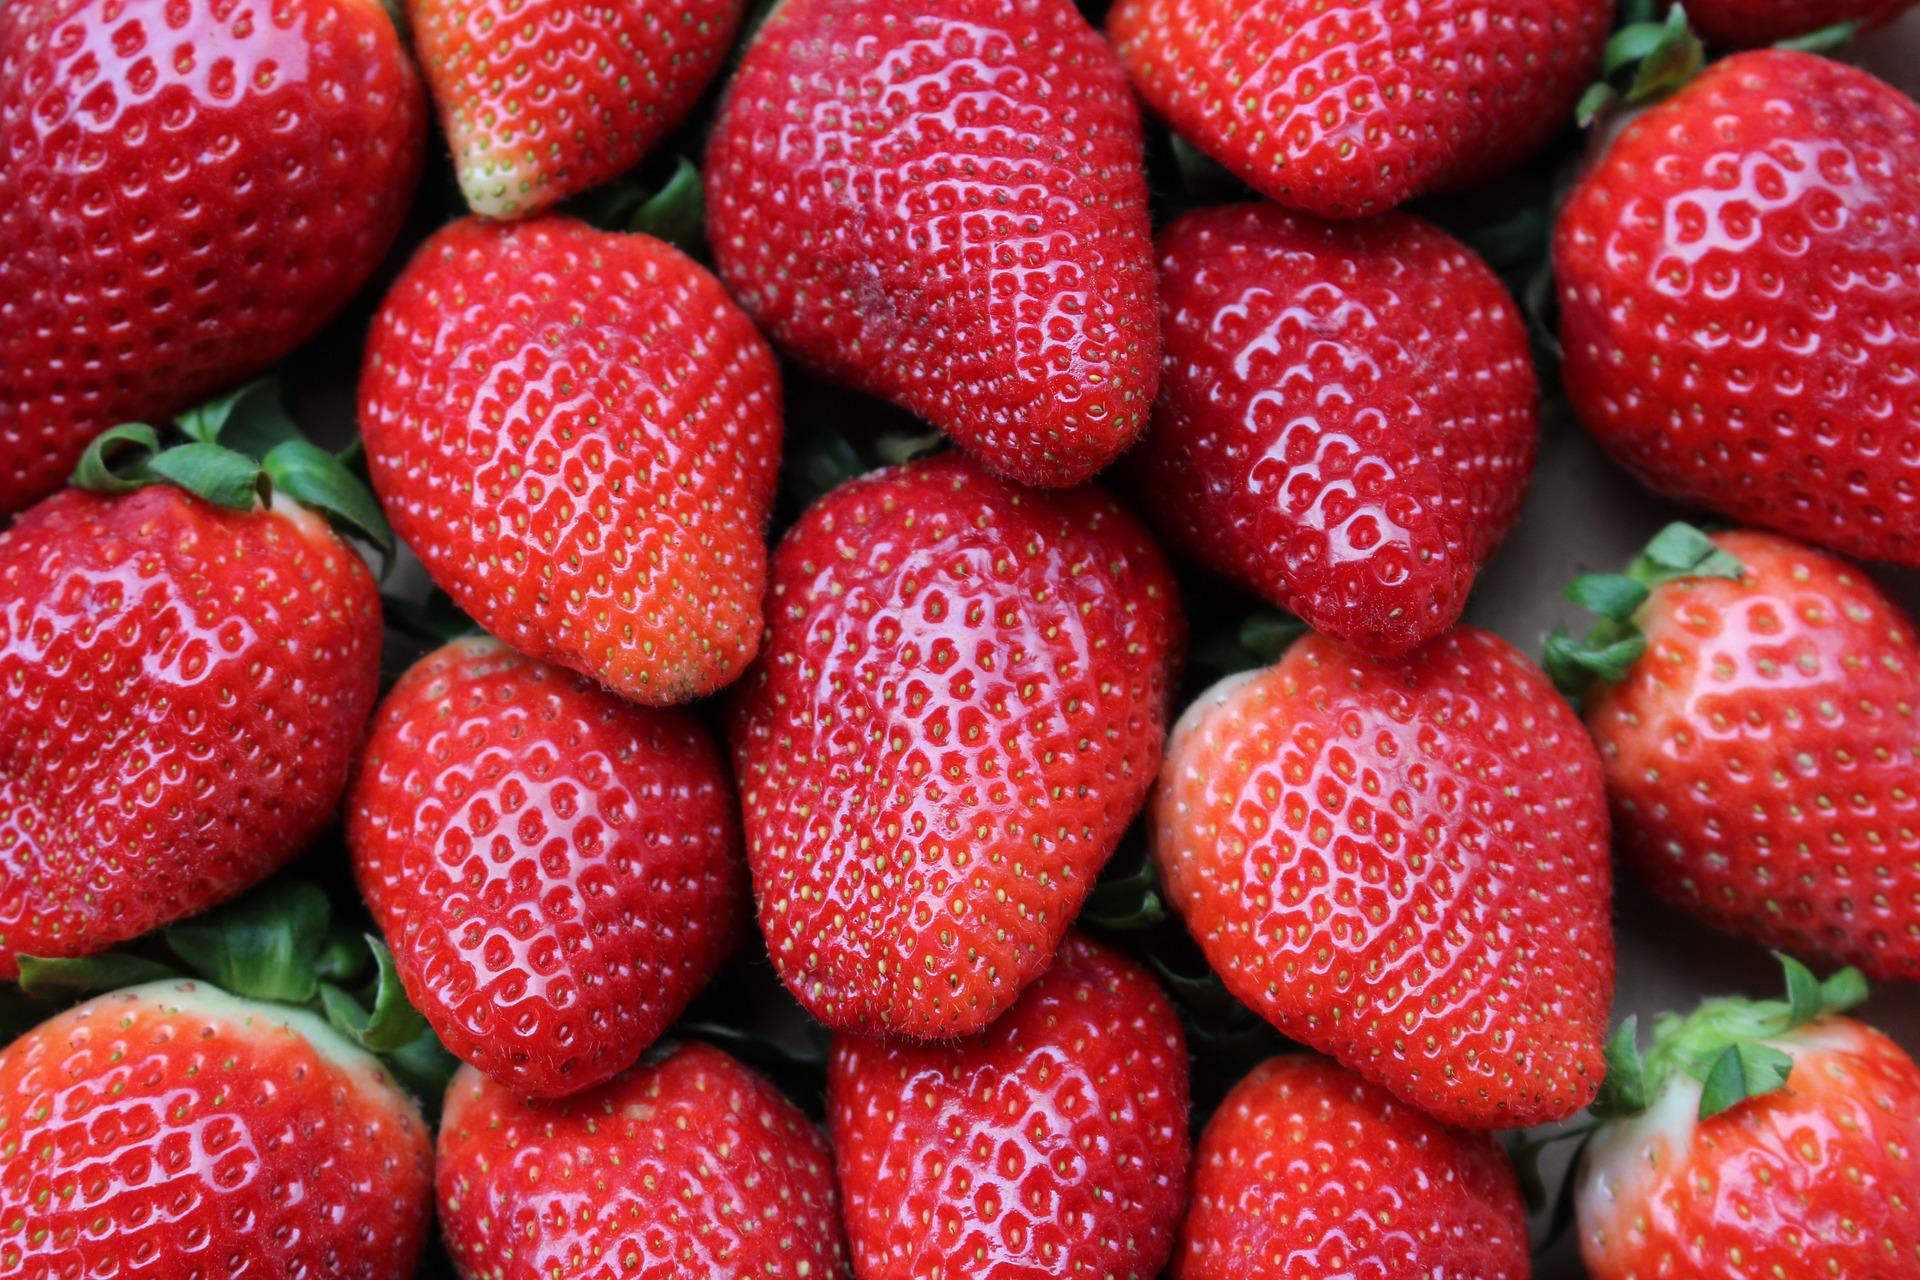 Strawberry Benefits and Side Effects